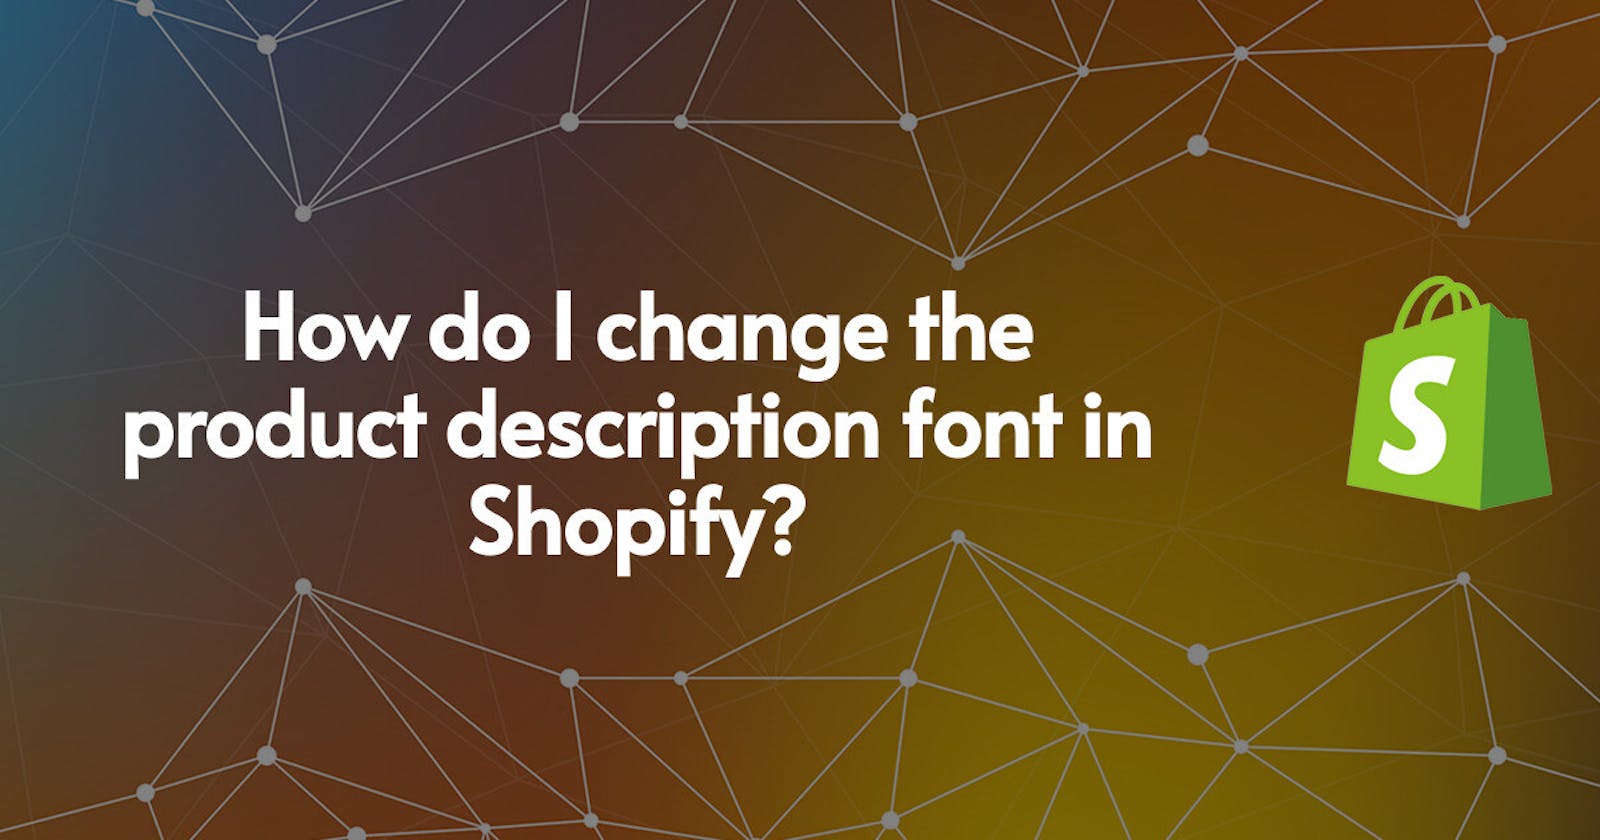 How do I change the product description font in Shopify?